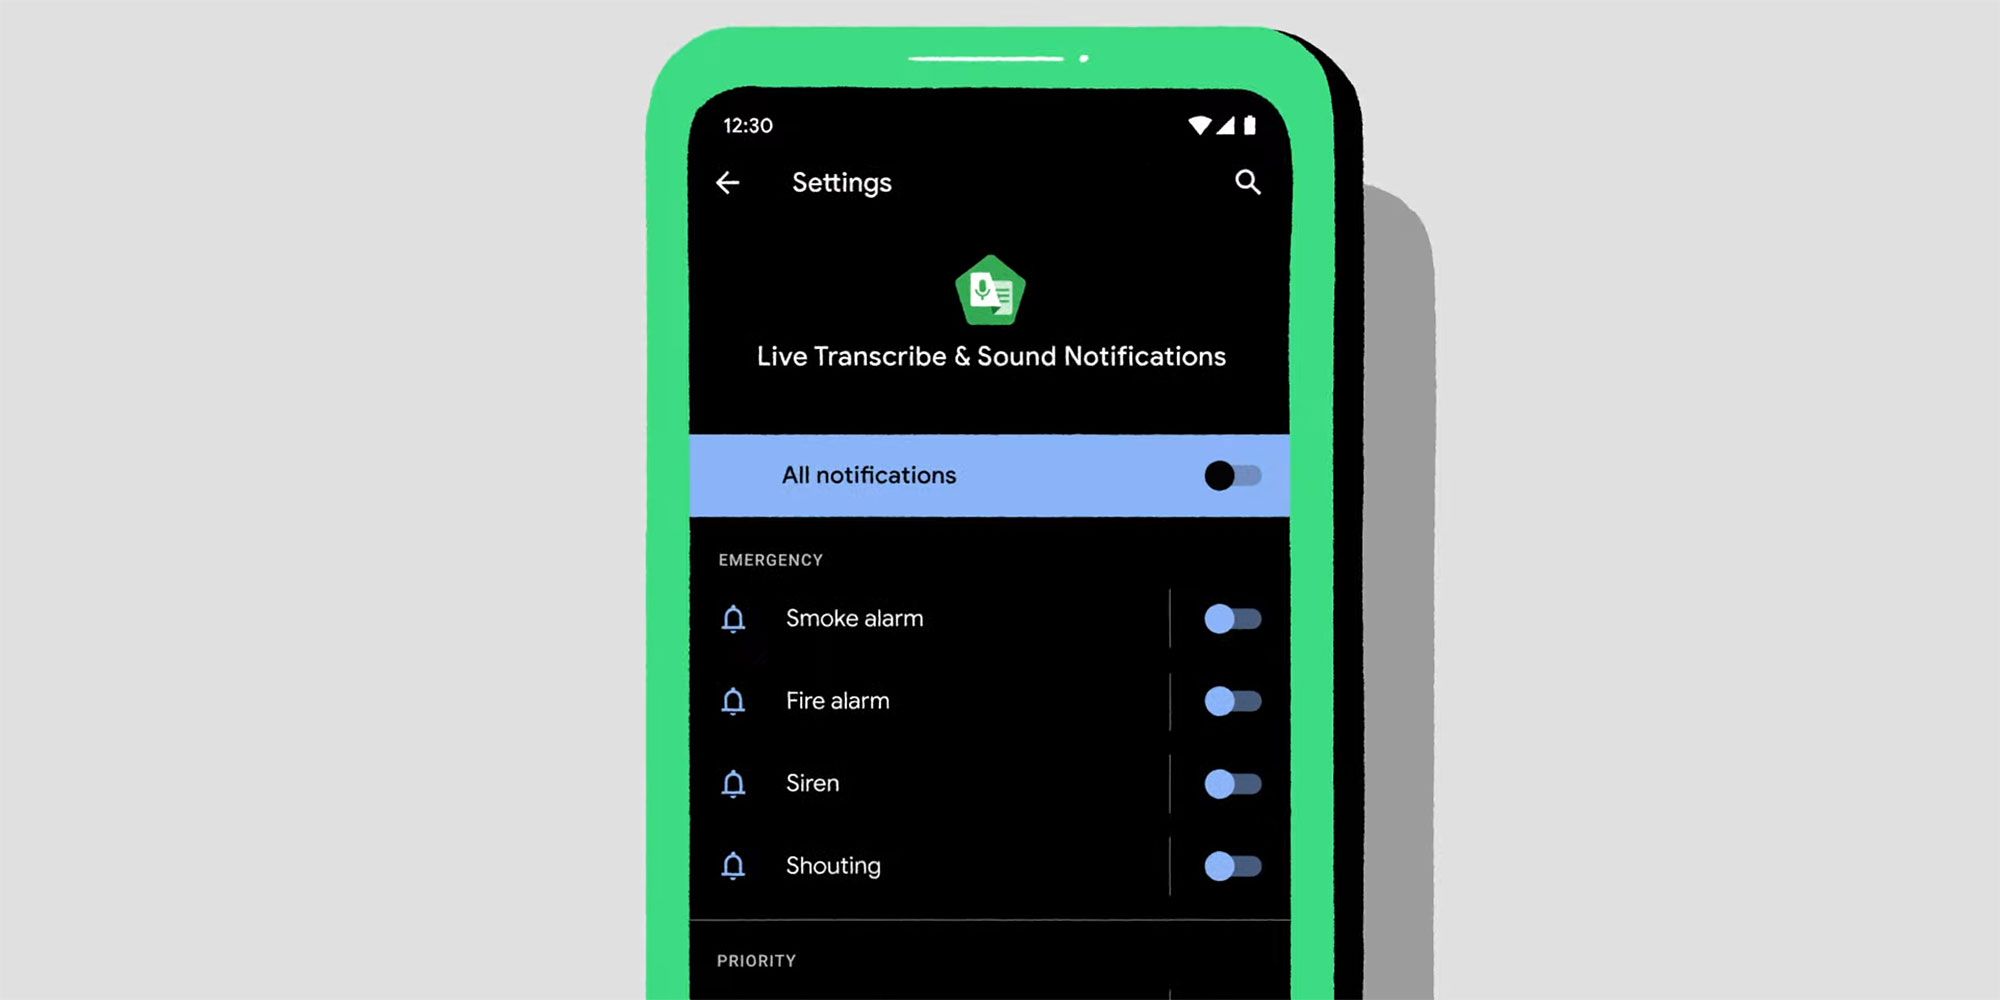 Android's Live Transcribe &amp; Sound Notifications setting